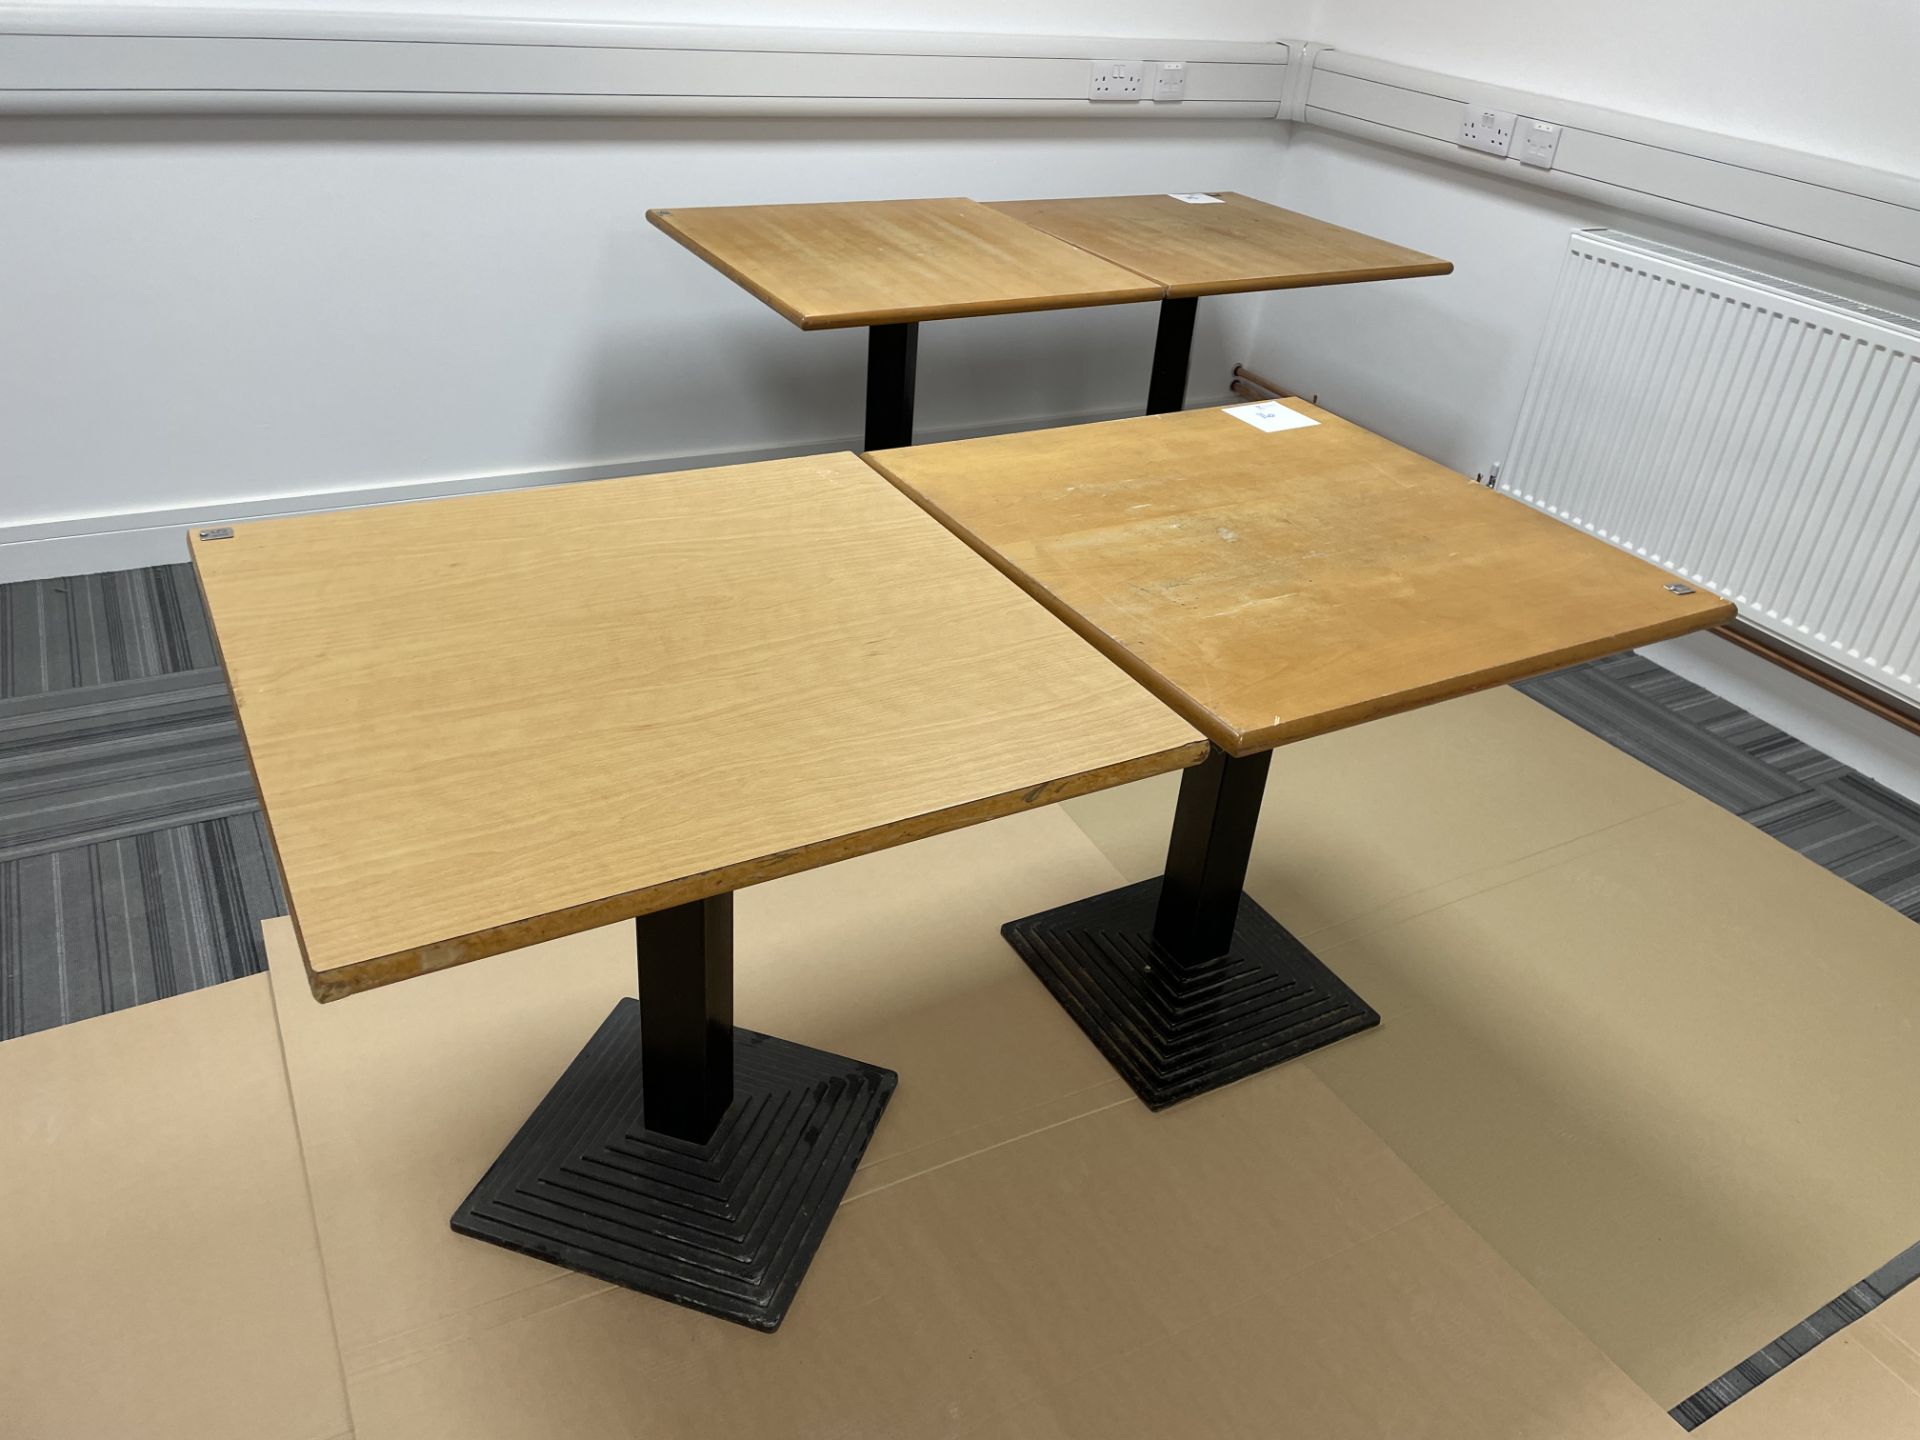 PAIR OF 750 x 750 BISTRO TABLES